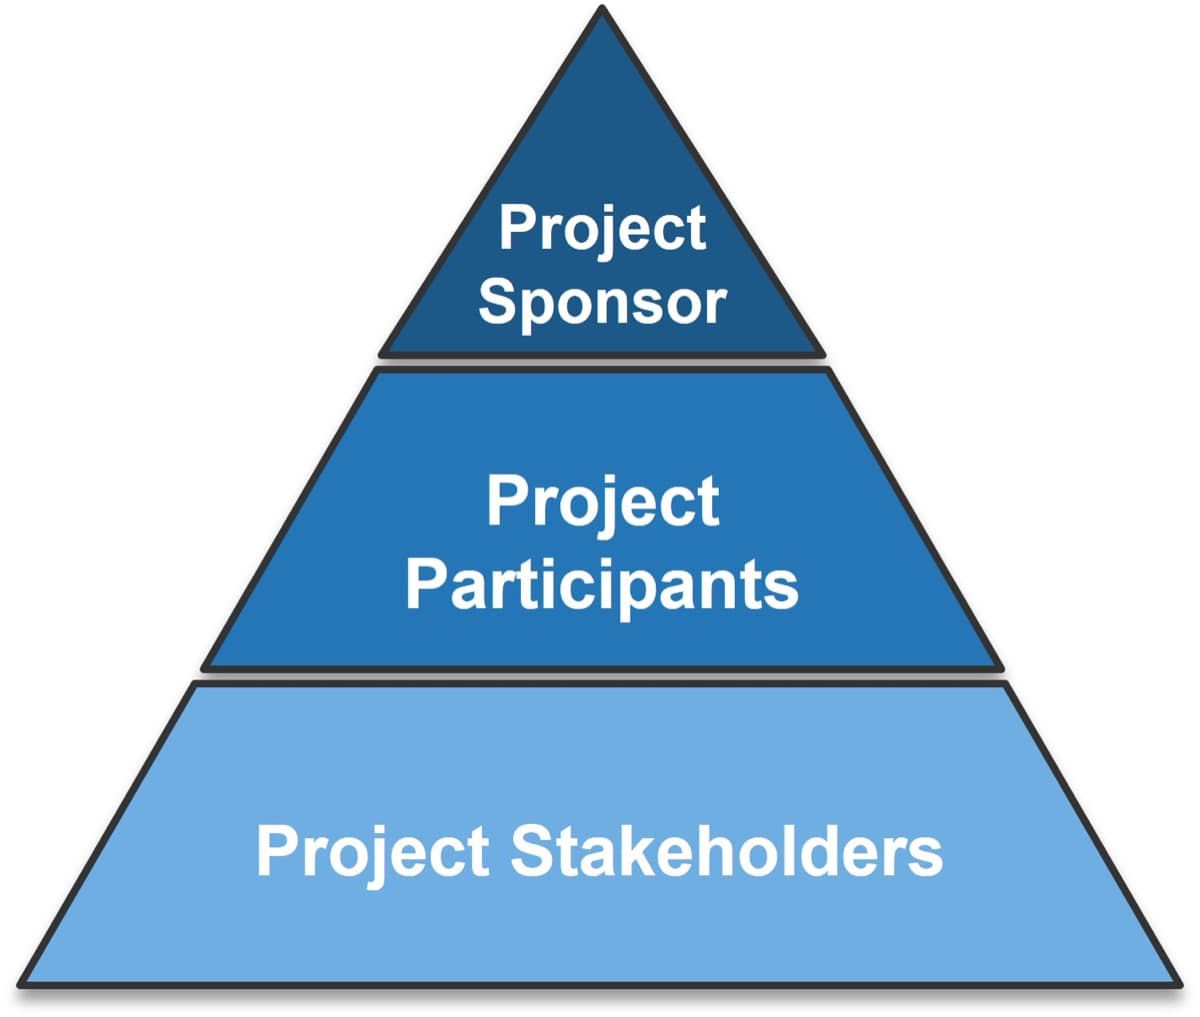 The image contains a triangle that has been split into three parts. The top section is labelled: Project Sponsor, middle section: Project Participants, and the bottom is labelled Project Stakeholders.